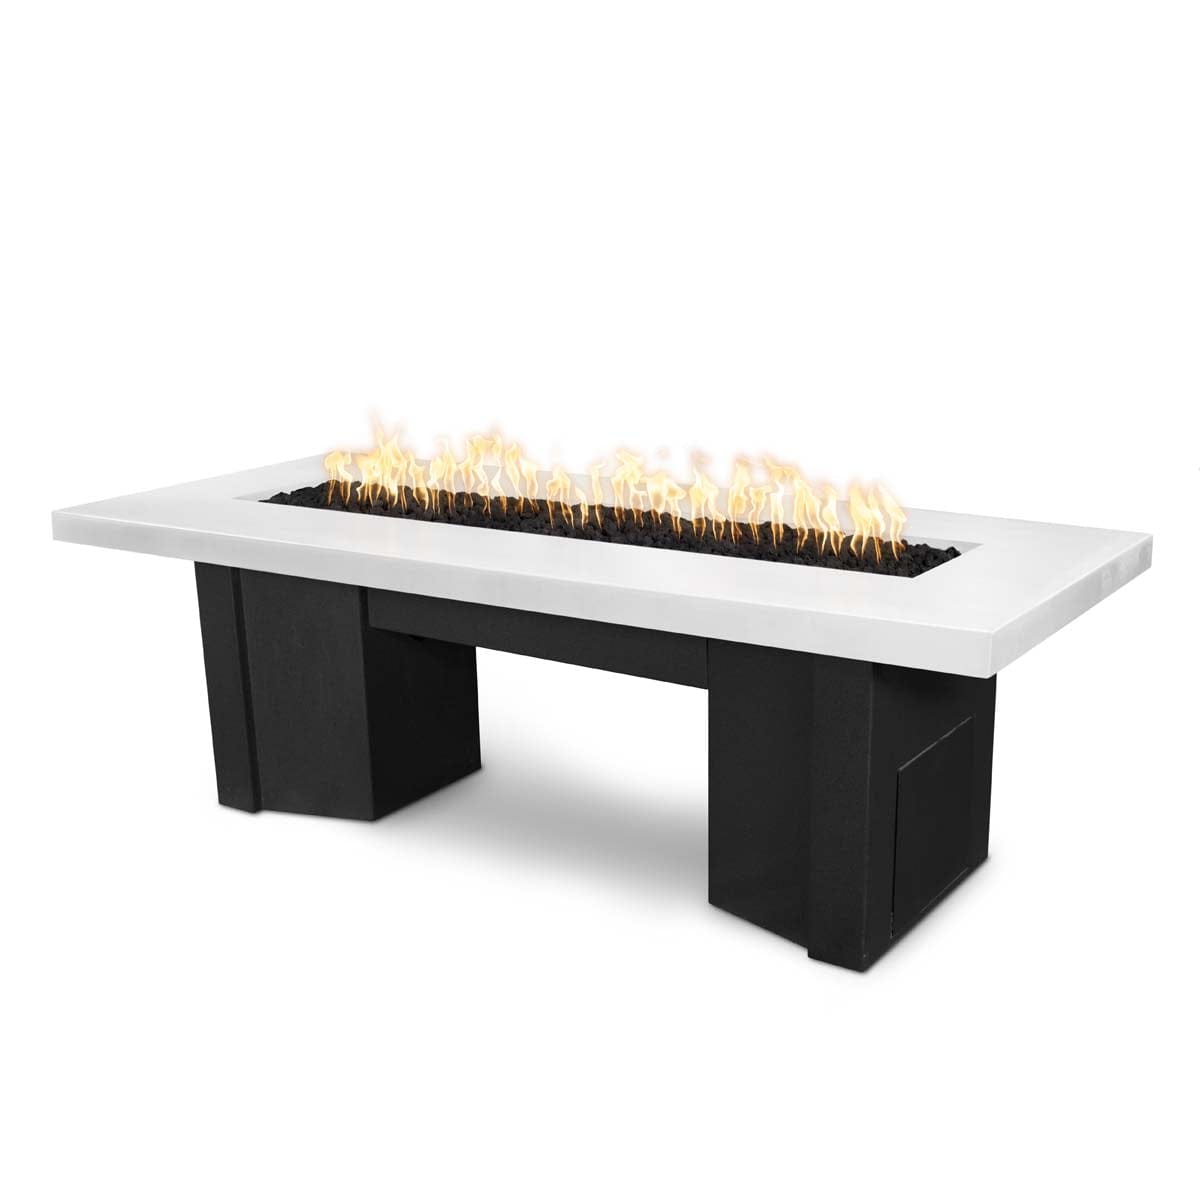 The Outdoor Plus Fire Features Limestone (-LIM) / Black Powder Coated Steel (-BLK) The Outdoor Plus 60&quot; Alameda Fire Table Smooth Concrete in Liquid Propane - Flame Sense System with Push Button Spark Igniter / OPT-ALMGFRC60FSEN-LP